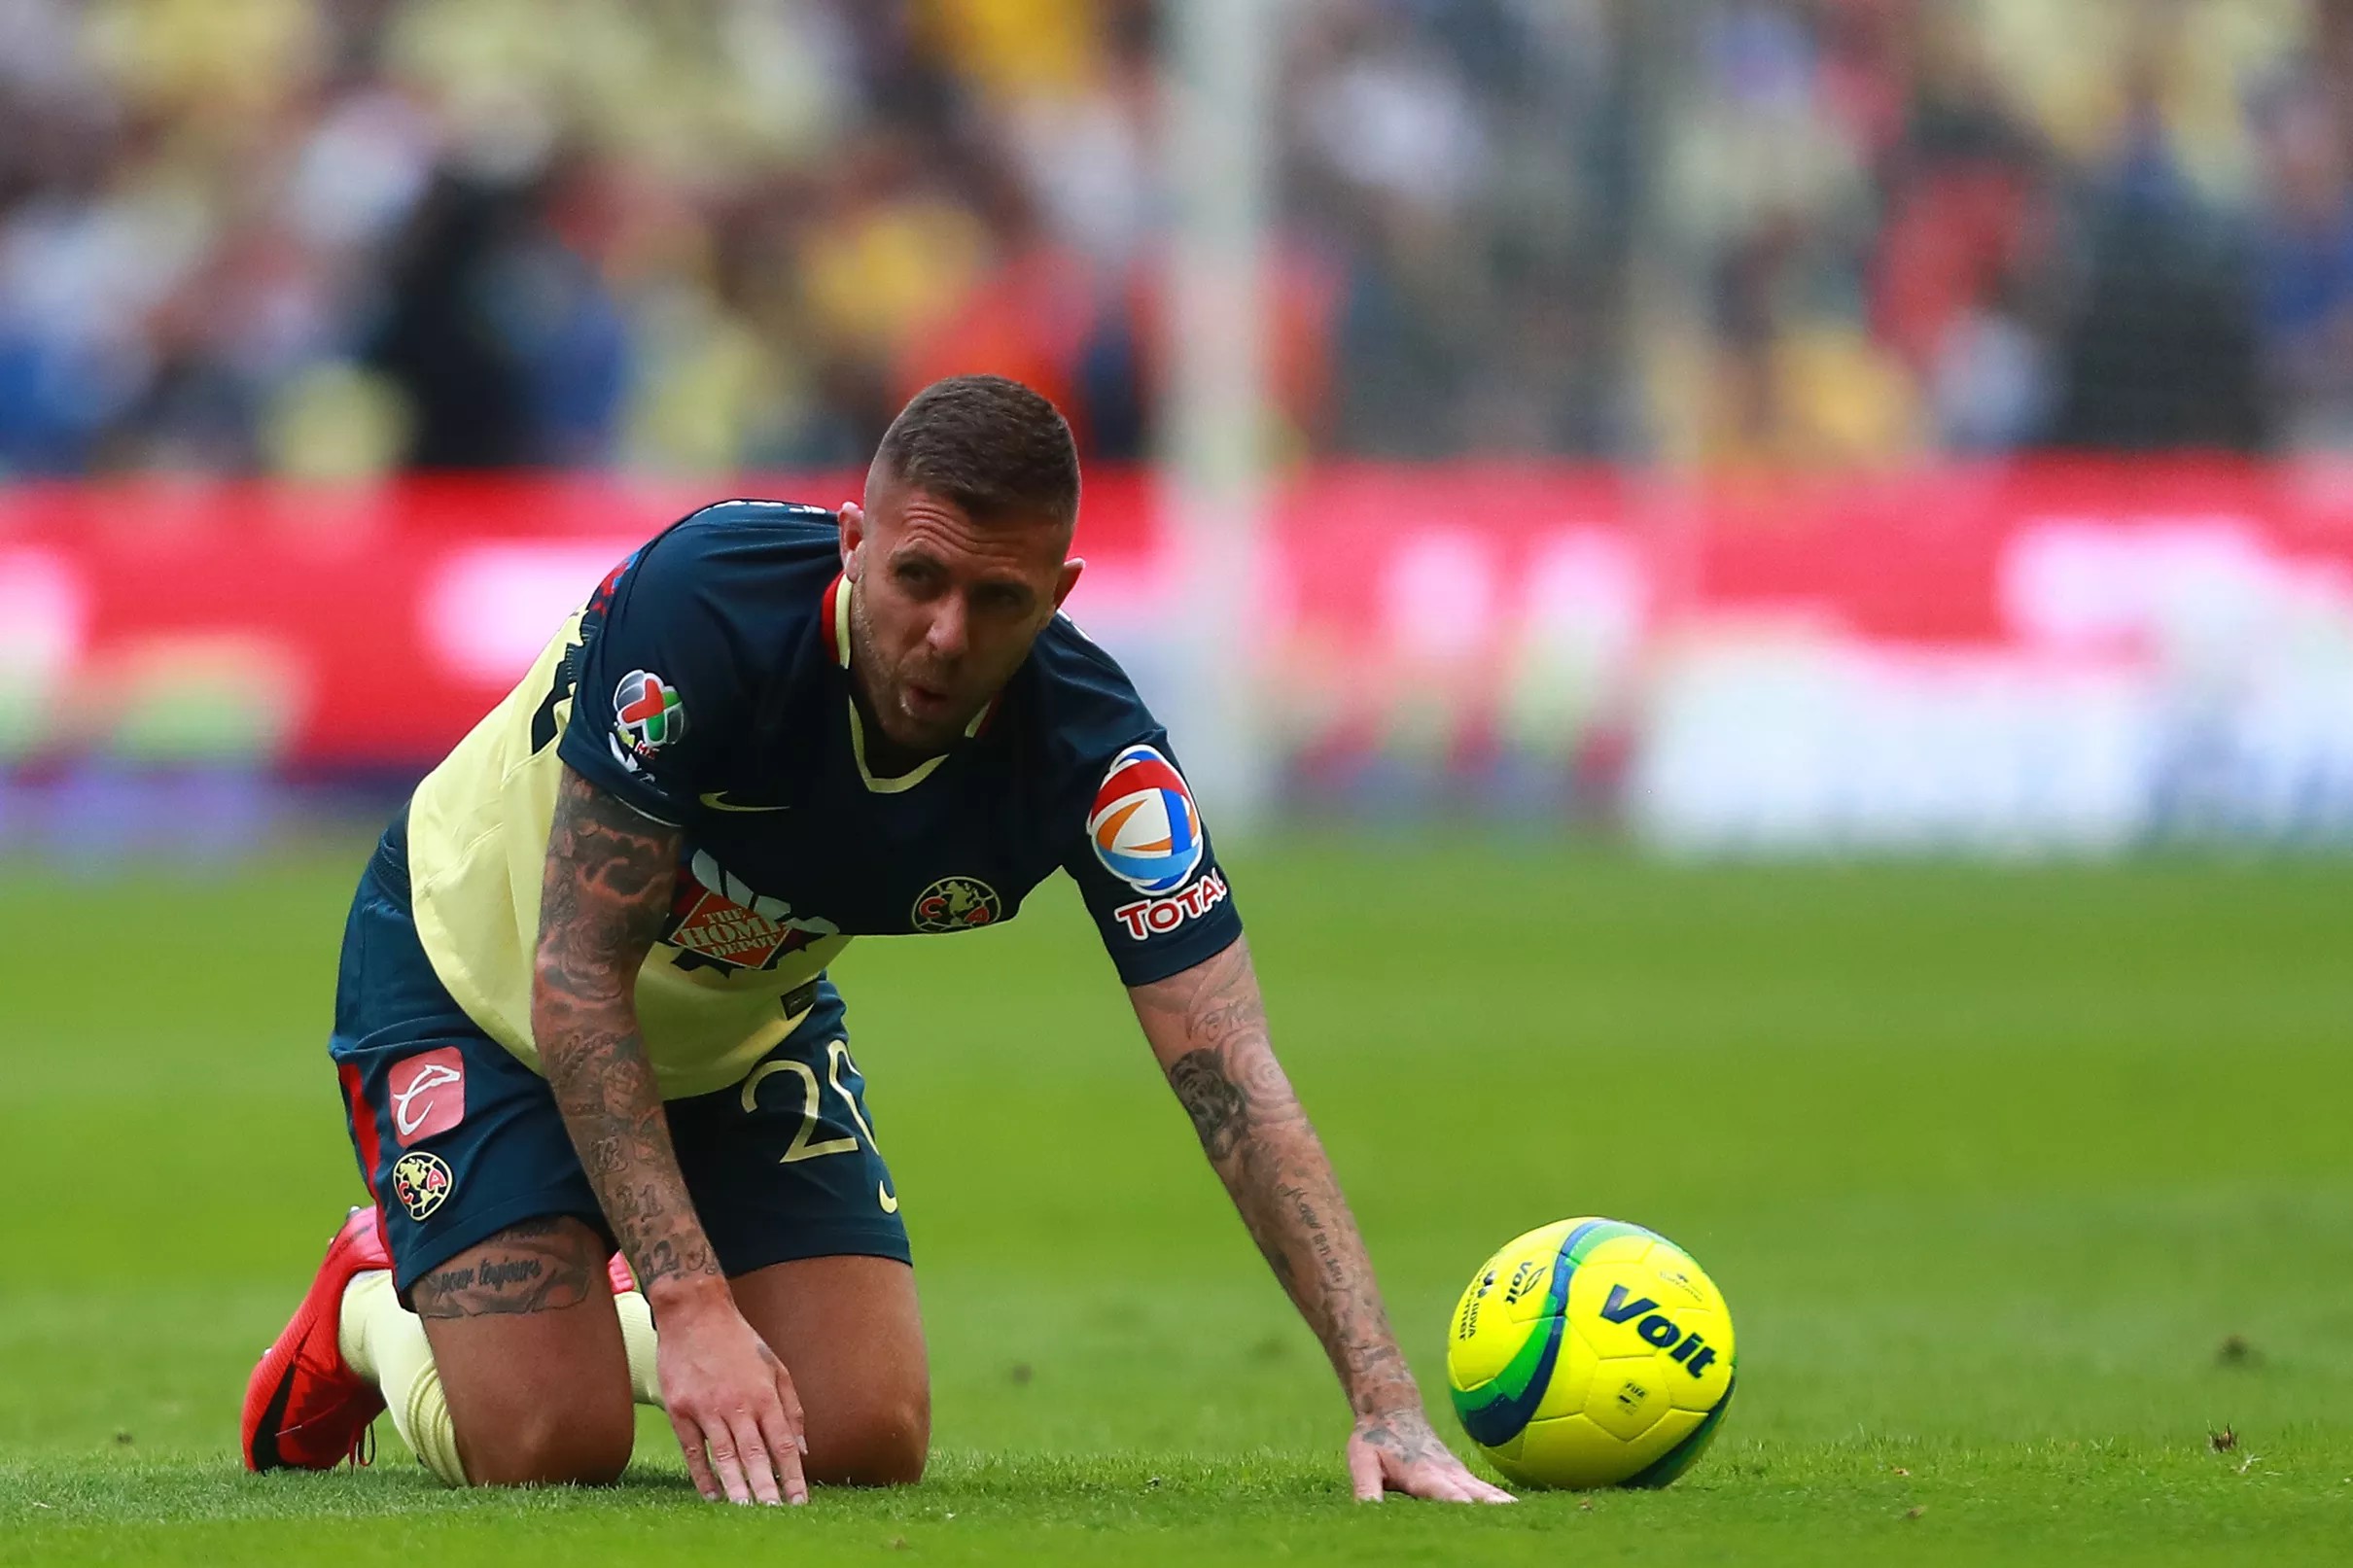 Club America’s Jeremy Menez out for the season after suffering torn ACL.